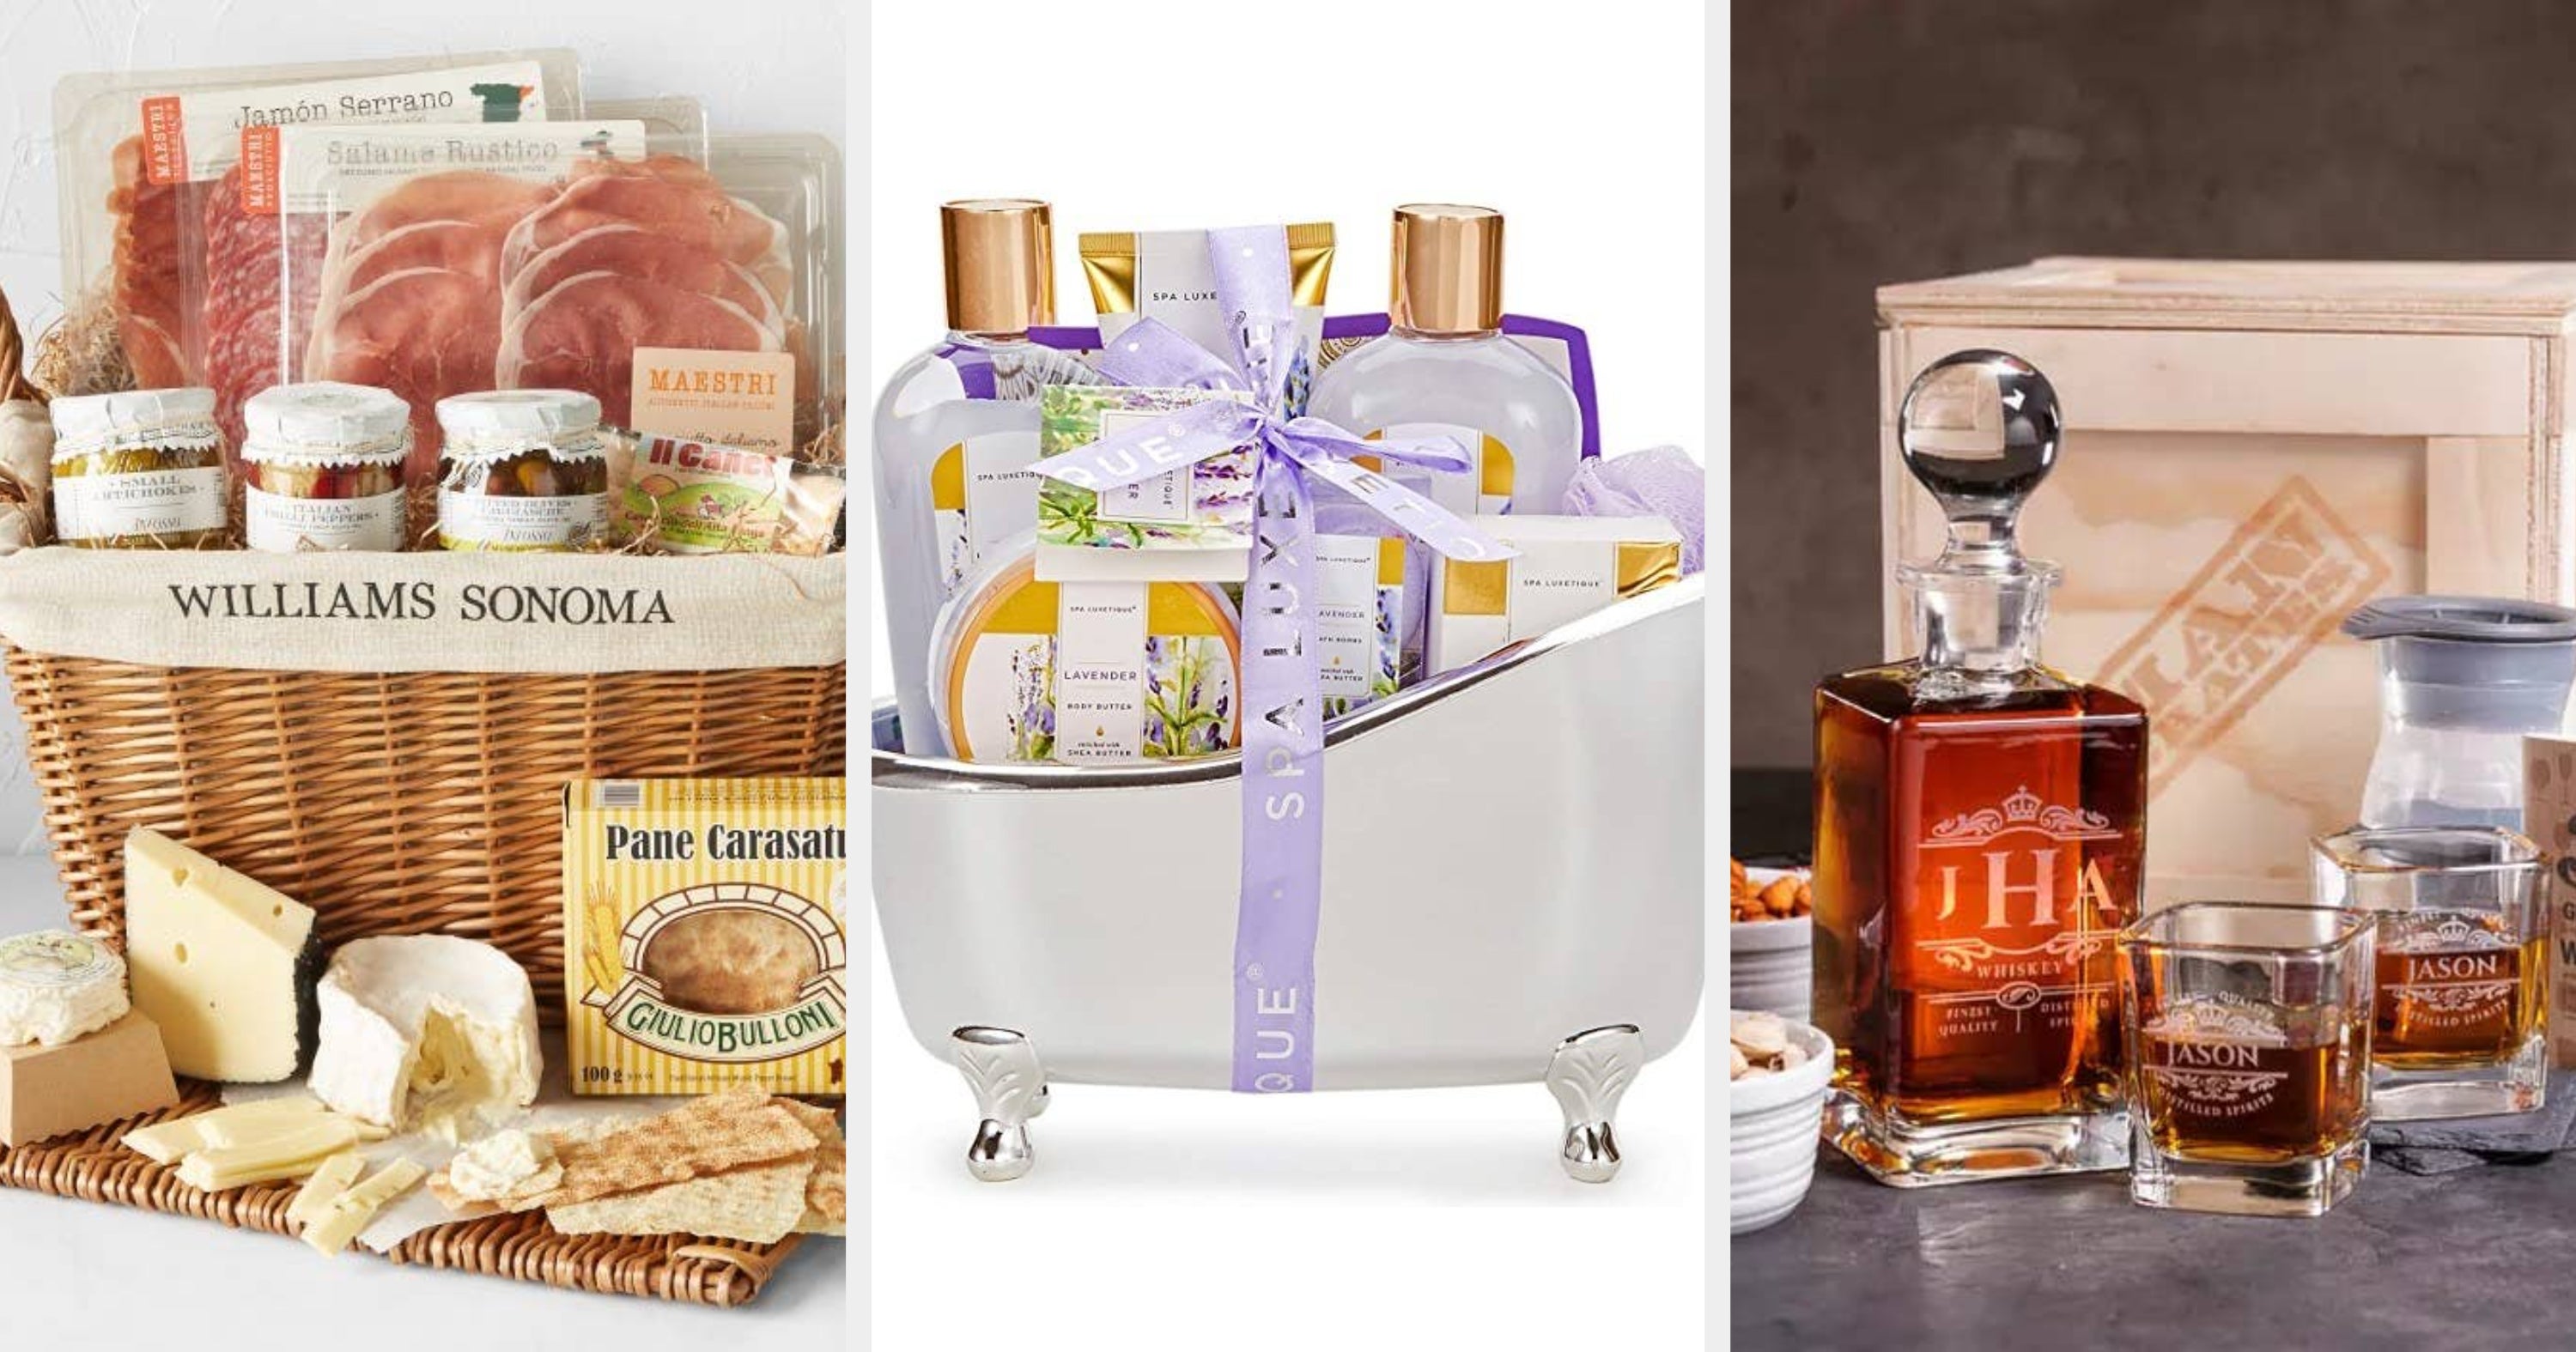 Birthday Gifts For Women Best Friend -relaxing Spa Gift Box Basket